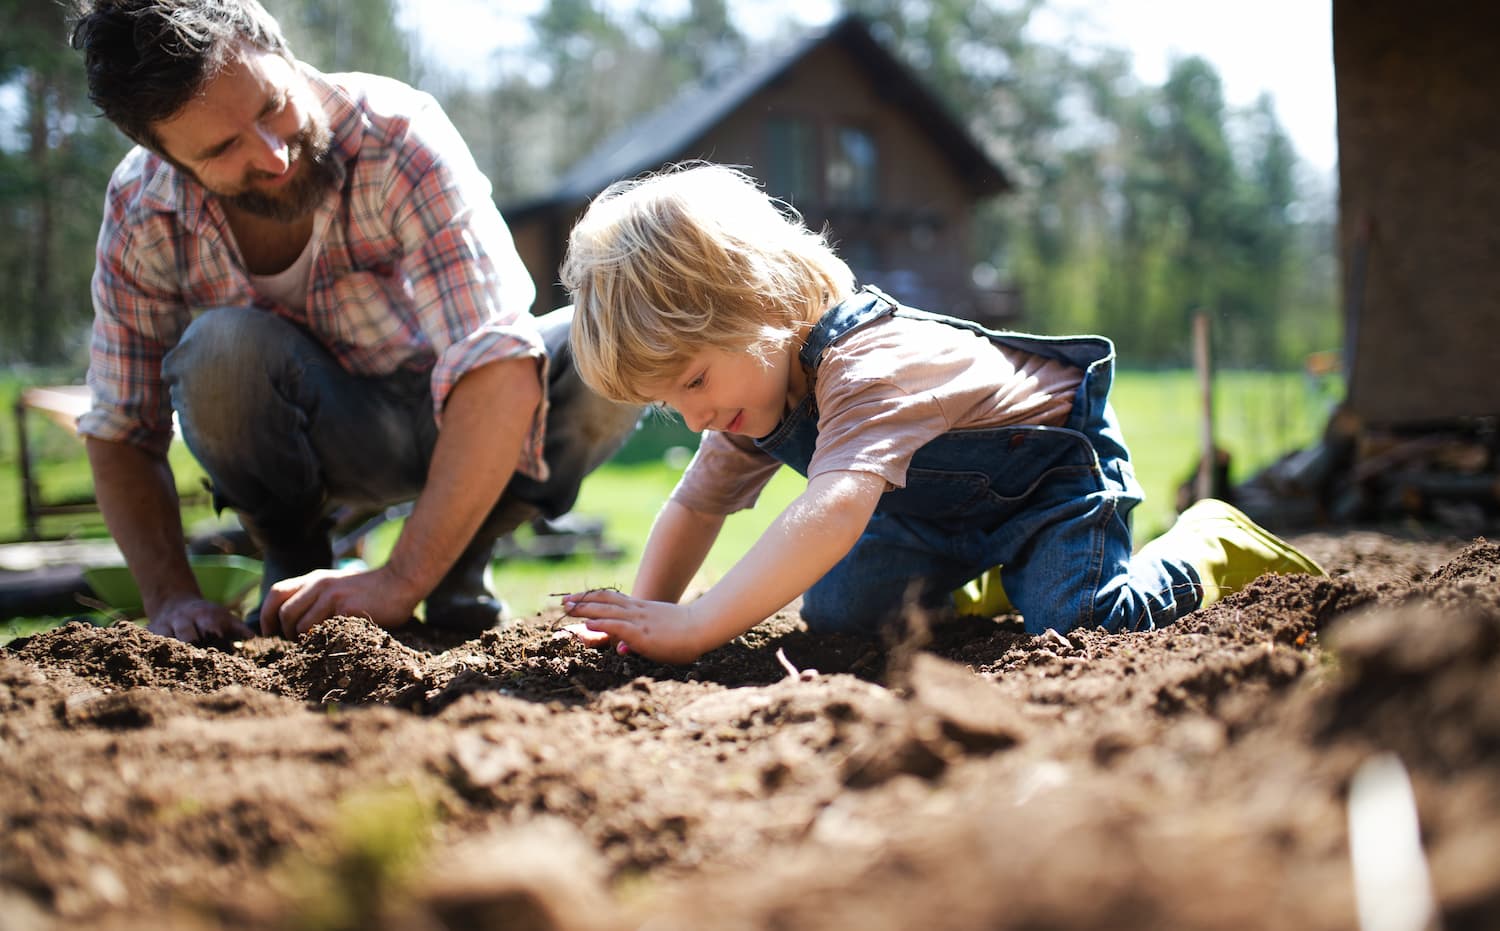 A dad showing his child how to plant a seed in soil